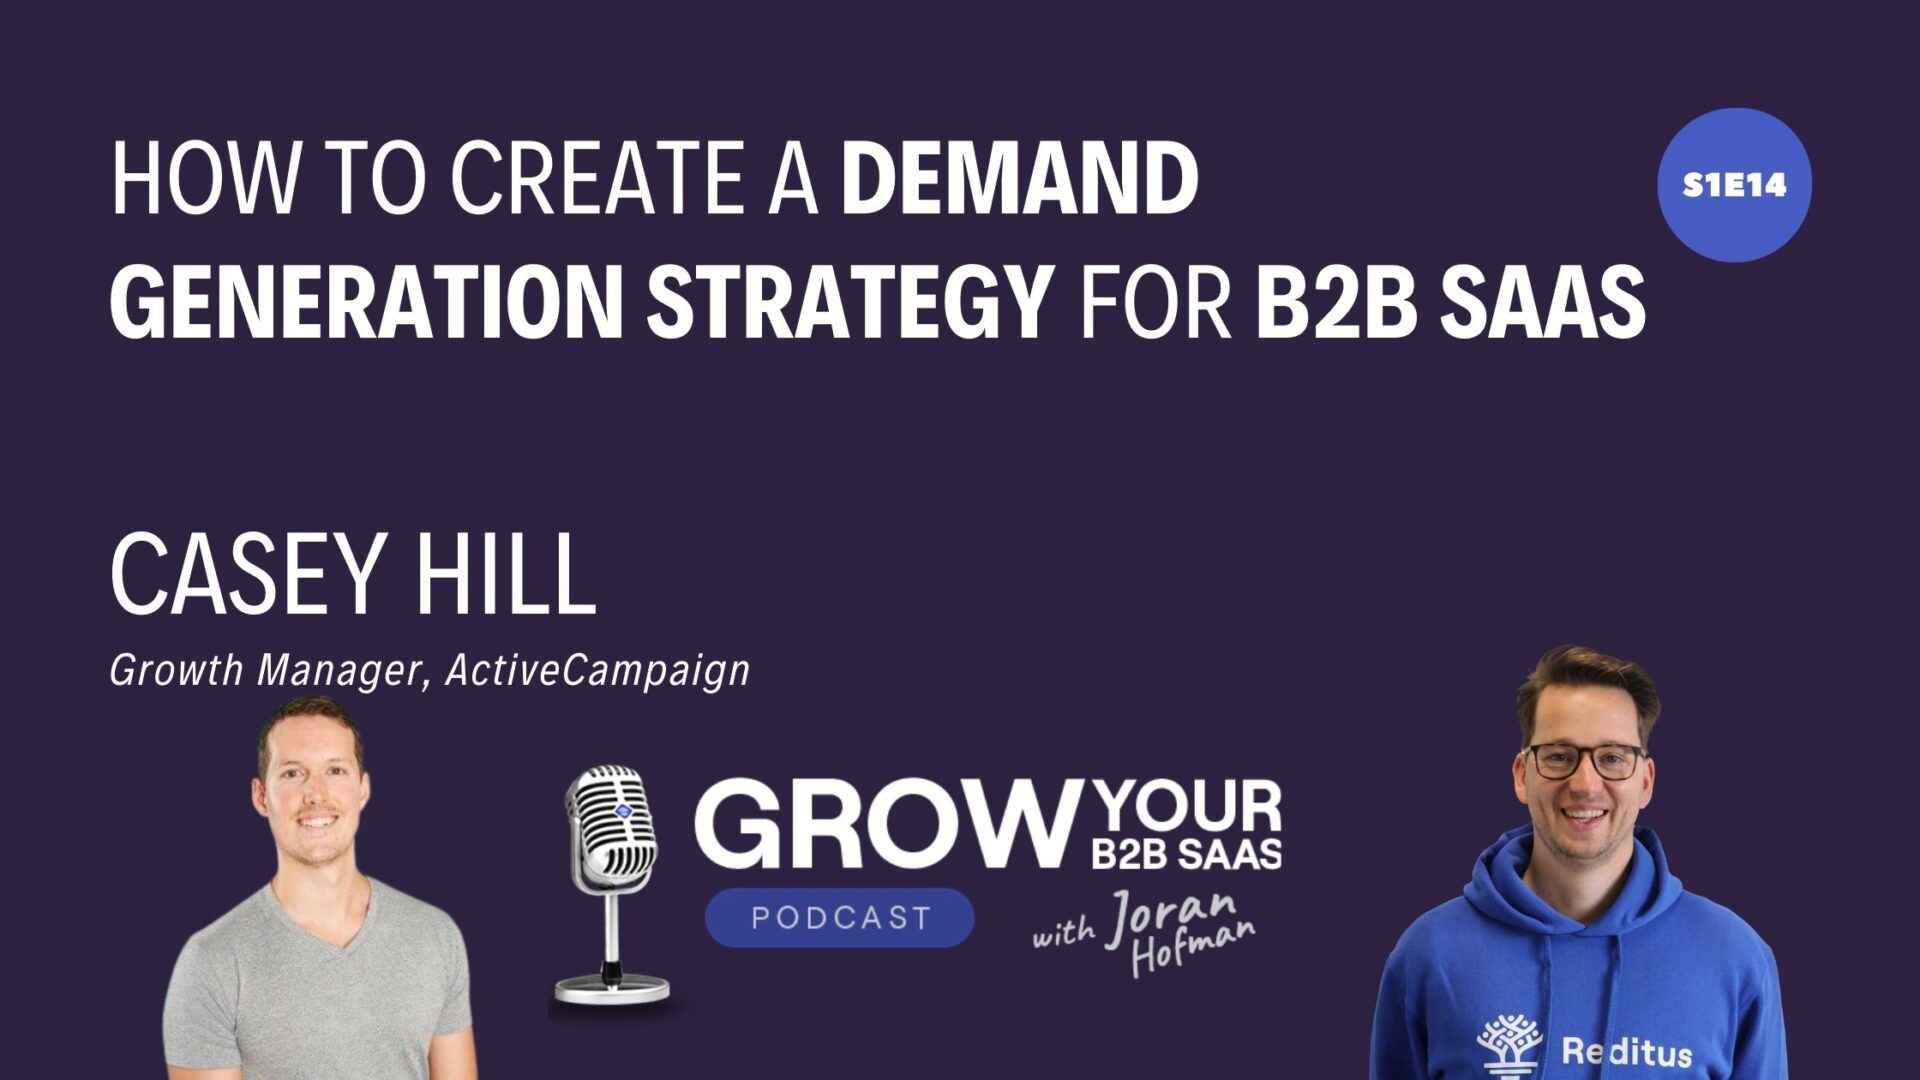 https://www.getreditus.com/podcast/s1e14-how-to-create-a-demand-generation-strategy-with-casey-hill/